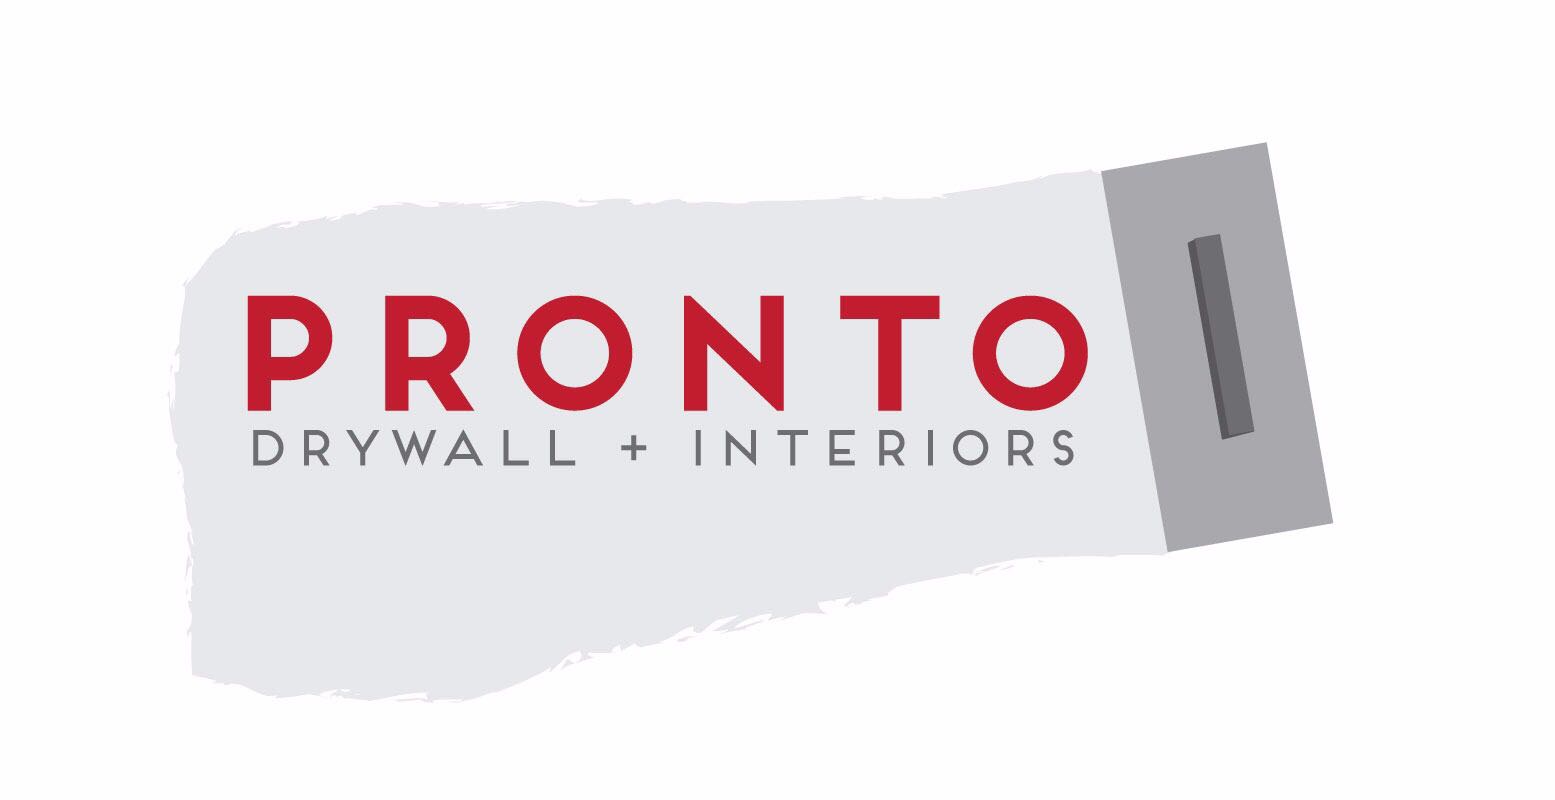 Pronto Drywall and Interiors